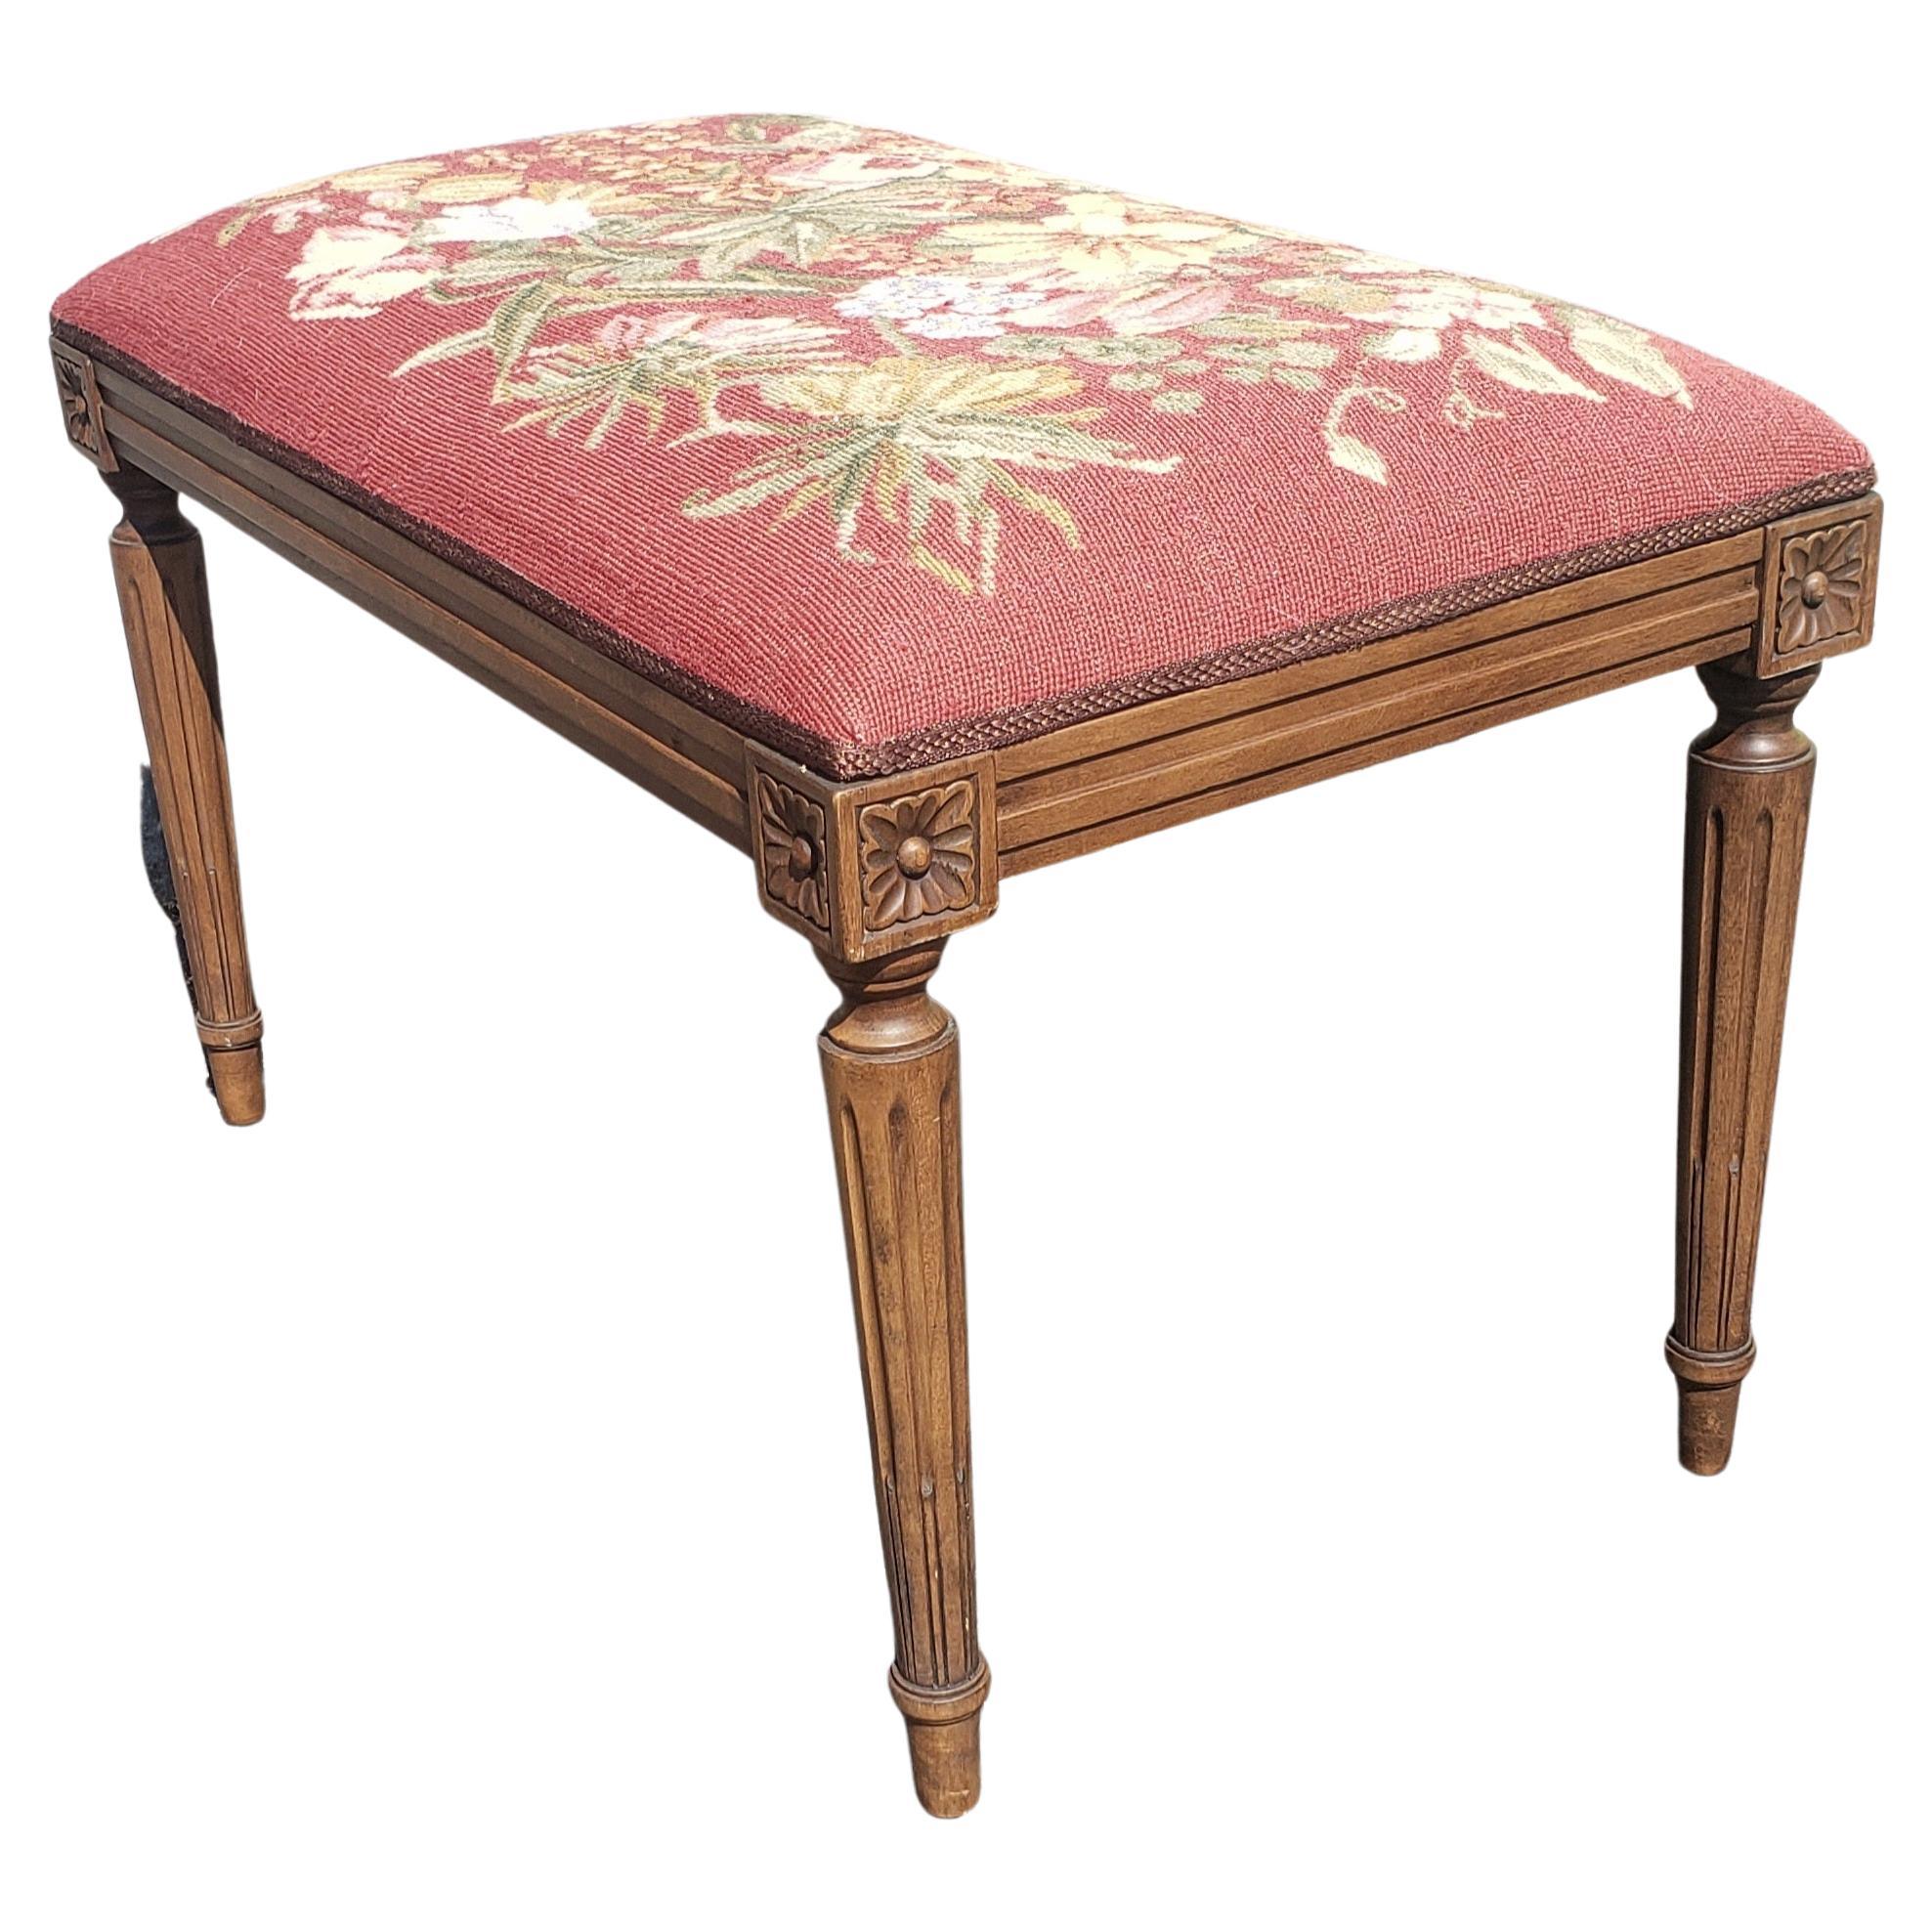 Needlework Louis XVI Style Walnut and Needlepoint Upholstered Tabouret Bench For Sale